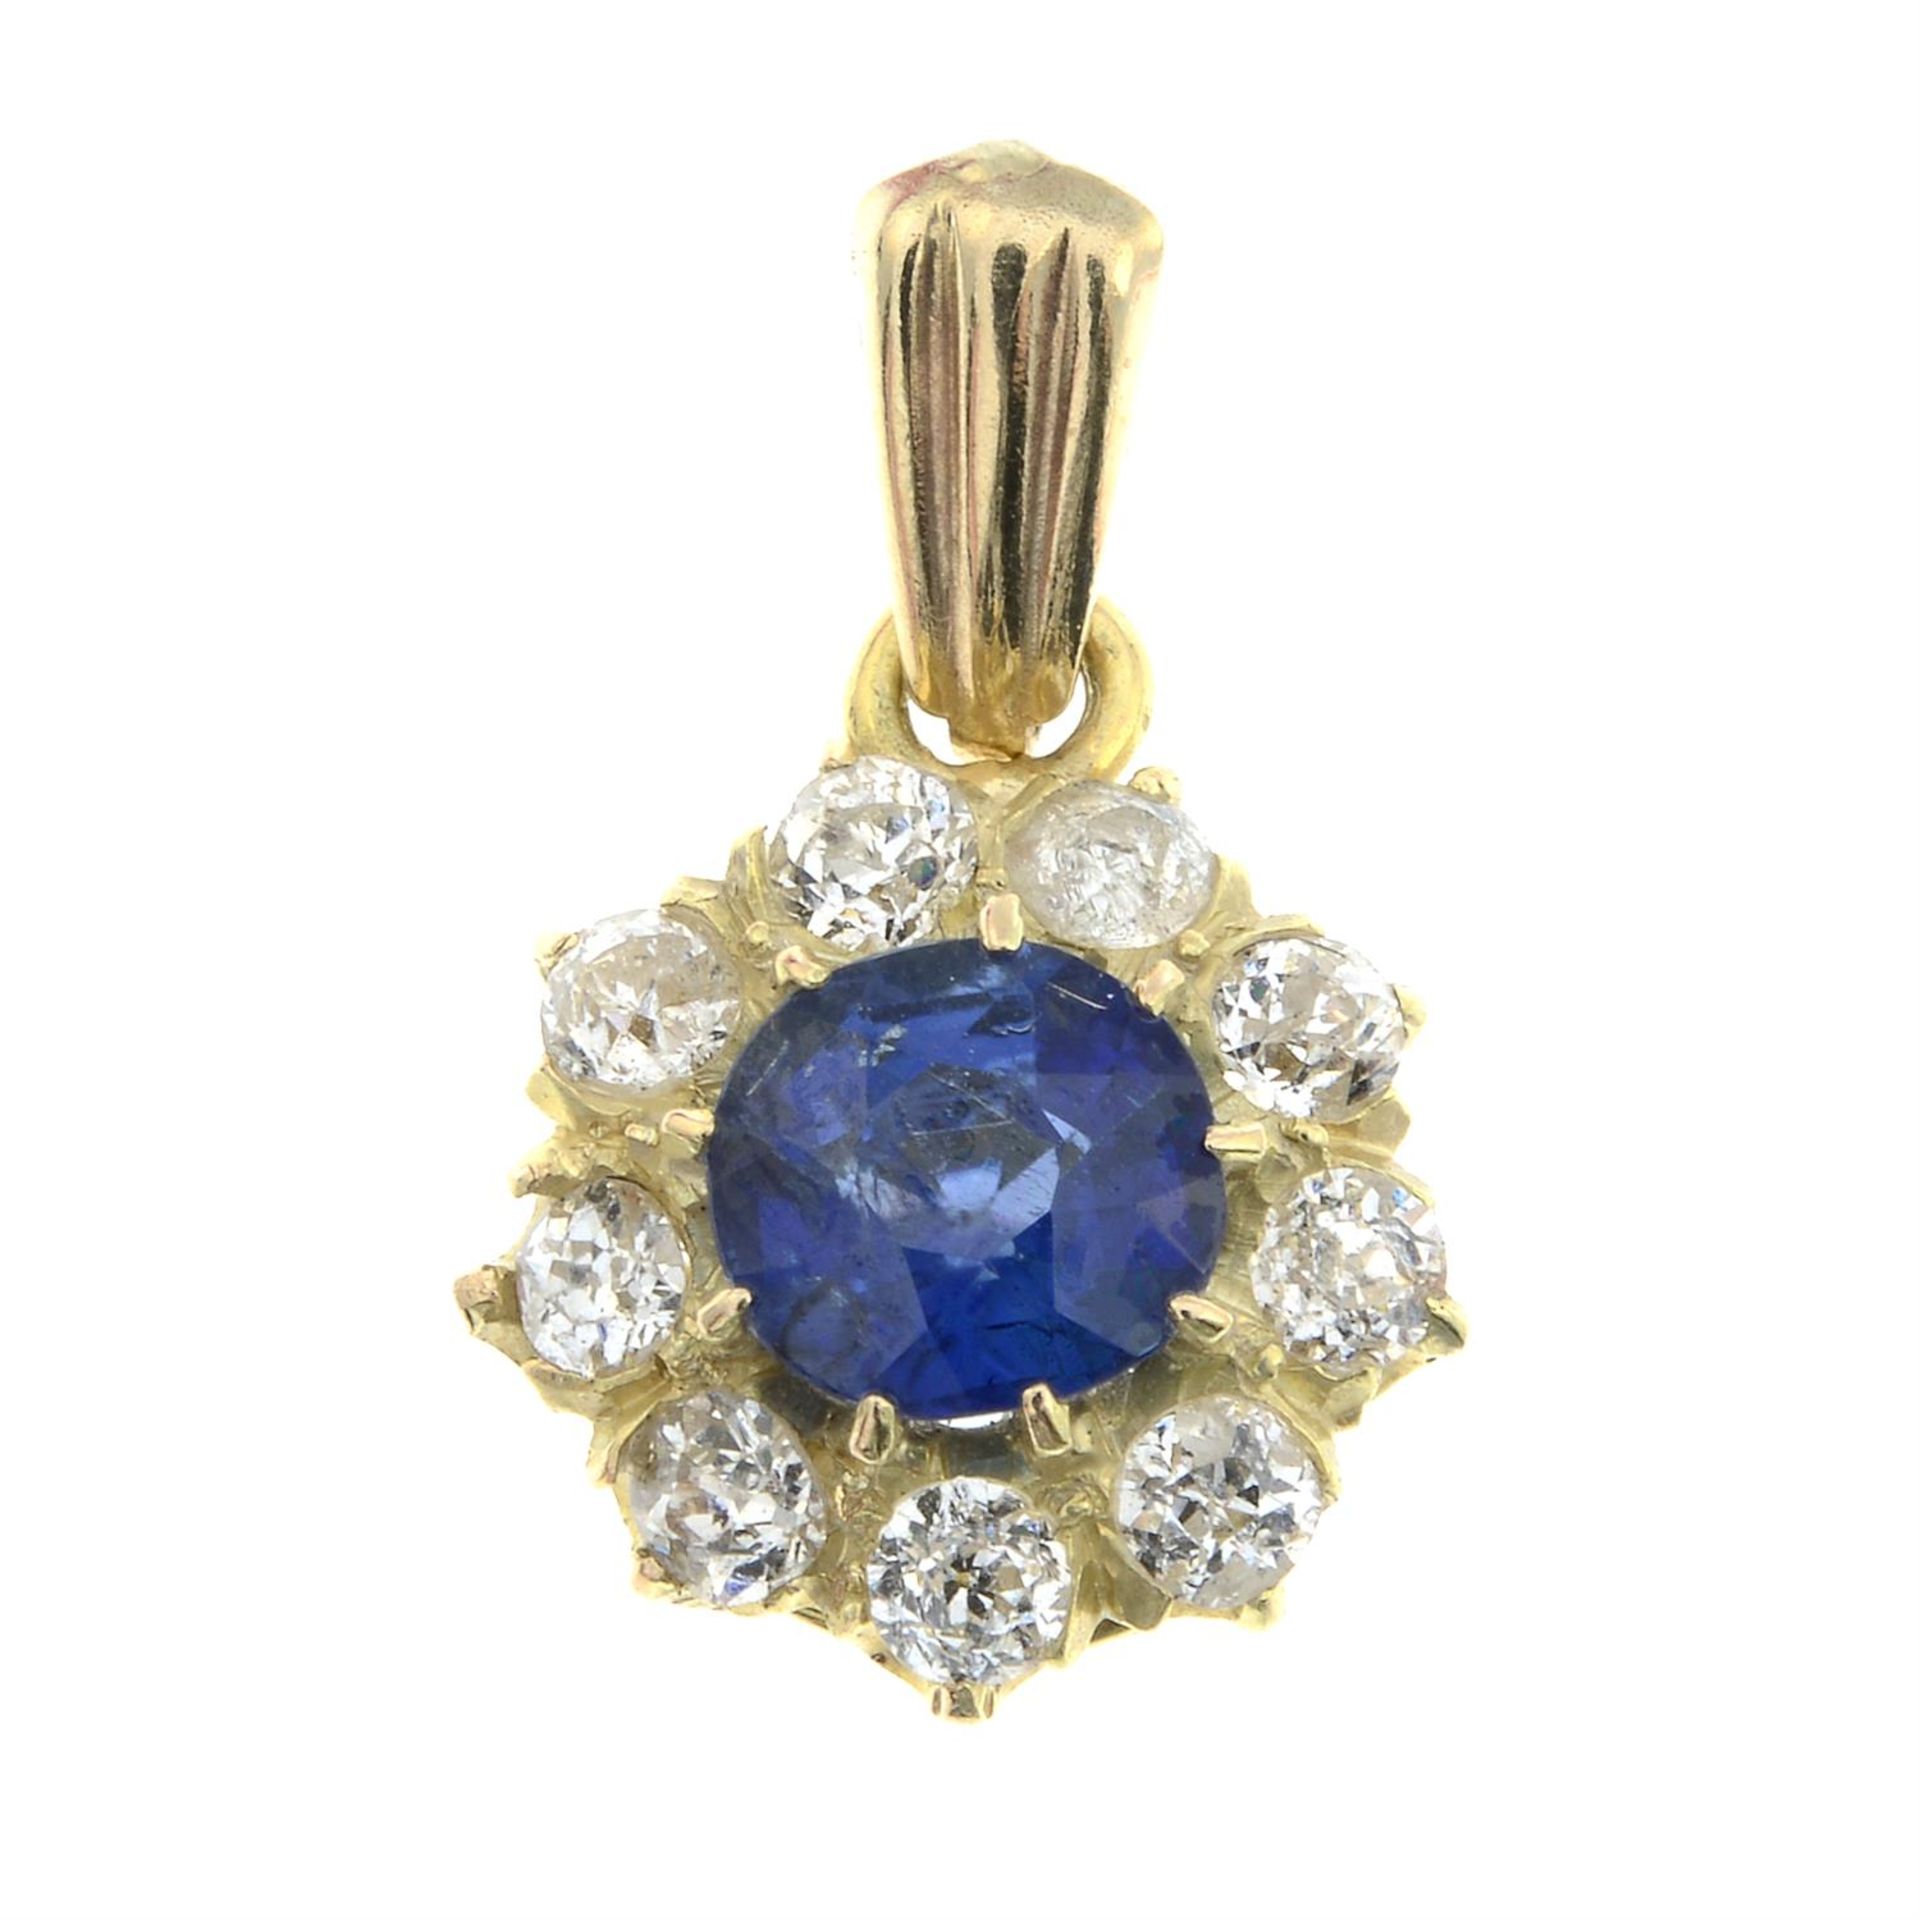 A late 19th century 15ct gold sapphire and old-cut diamond ring head, later mounted as a pendant. - Image 2 of 4